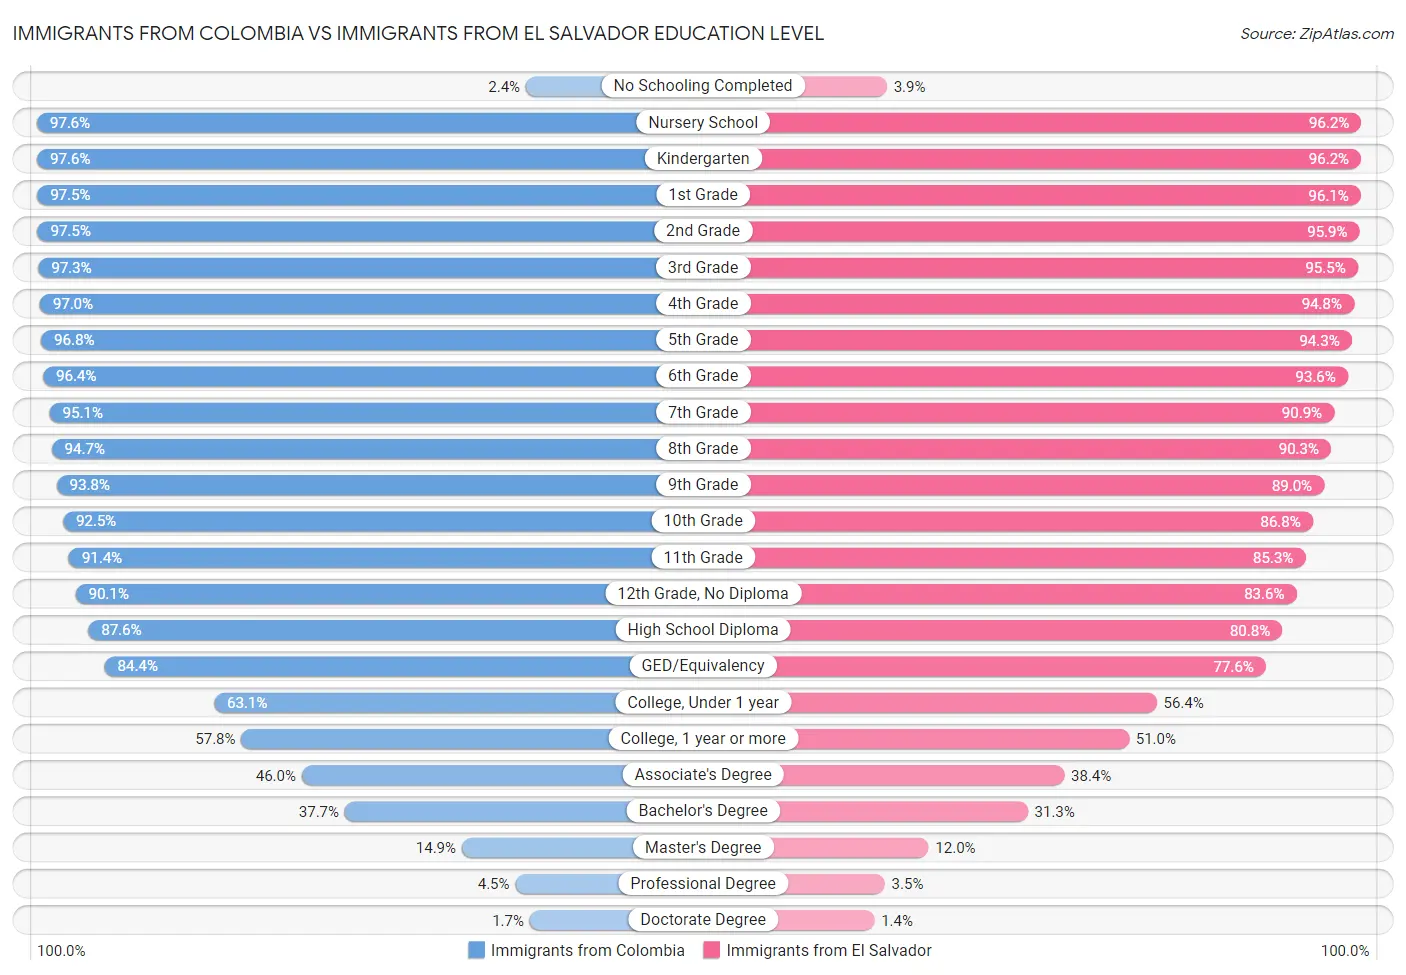 Immigrants from Colombia vs Immigrants from El Salvador Education Level